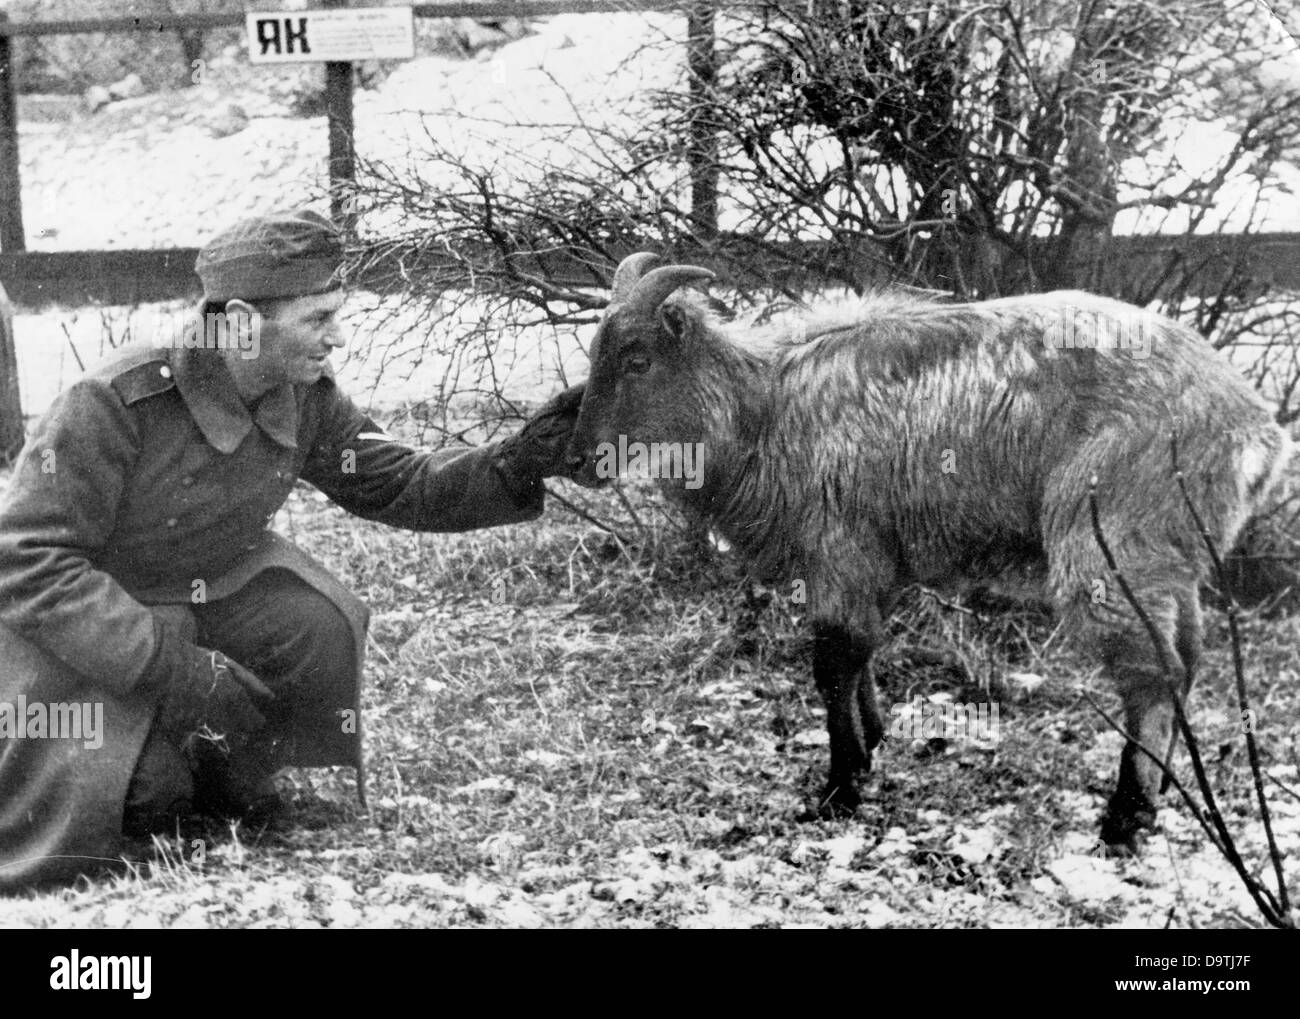 The Nazi Propaganda! on the back of the image reads: 'In the zoo in Kharkiv. In the Kharkiv Zoo, many animals walk freely. Our soldiers befriended them in a short period of time. A Yak calf.' (Here: a soldier caresses a goat.) Image from the Eastern Front/Ukraine, published on 3 December 1941. The attack on the Soviet Union by the German Reich was agreed on in July 1940 and prepared as the 'Operation Barbarossa' since December 1940. On 22 June 1941, the invasion by the German Wehrmacht started. Fotoarchiv für Zeitgeschichte Stock Photo